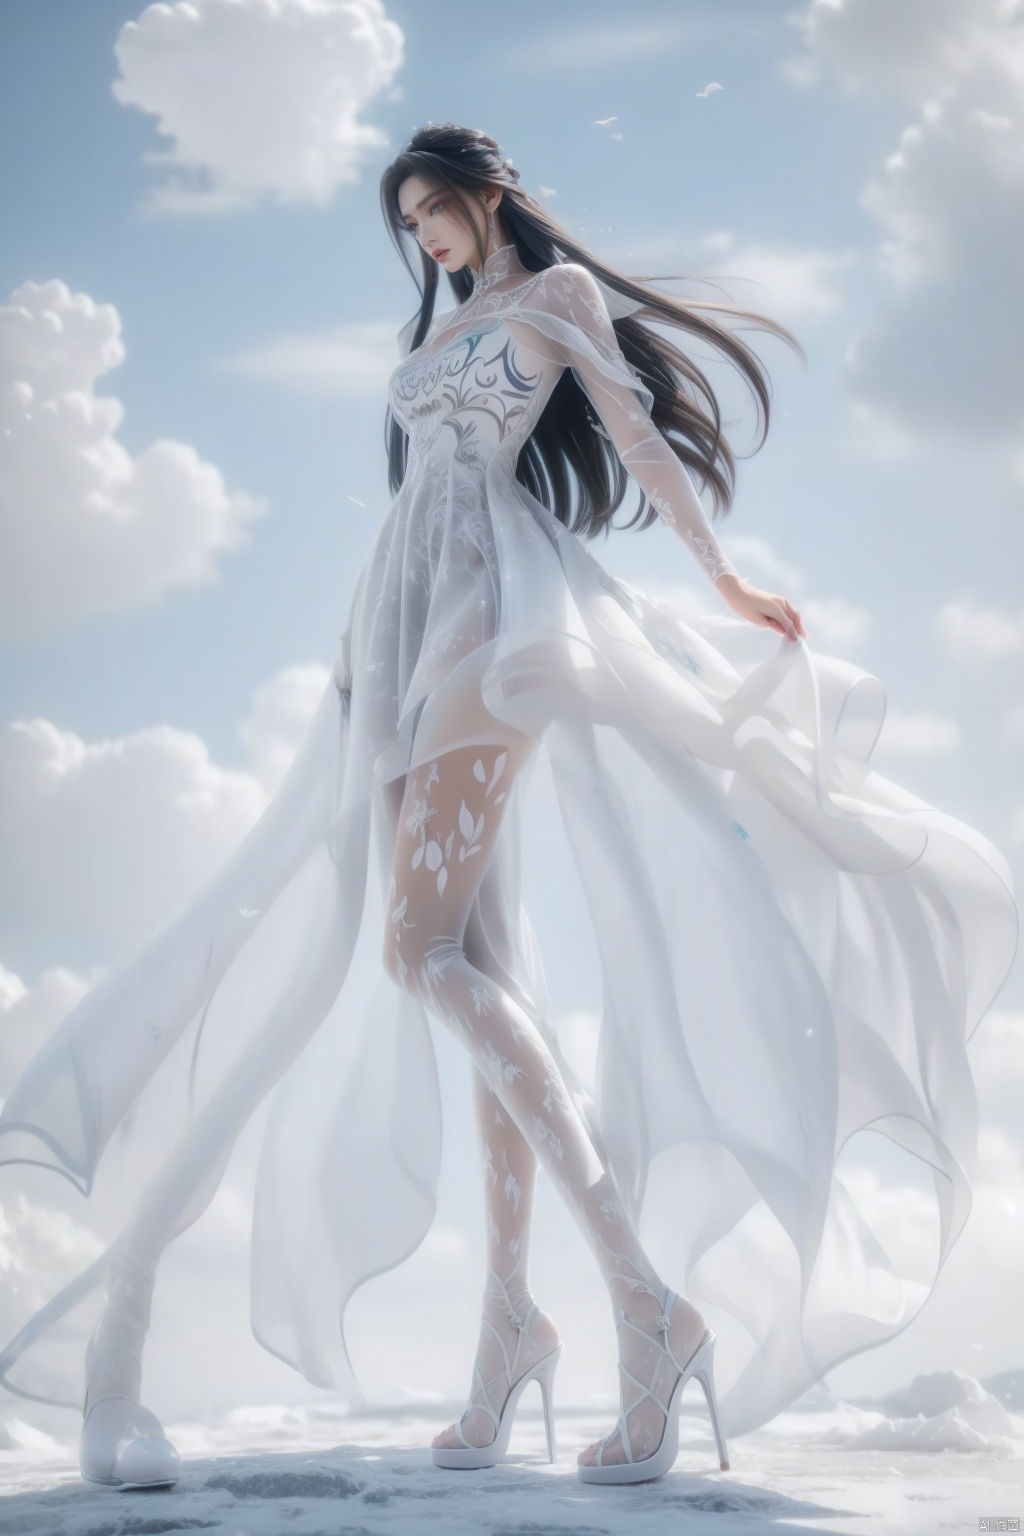  White evening dress, white theme, blooming everywhere, long hair fluttering, white clouds blossoming,Full-body high heels, white printed pantyhose